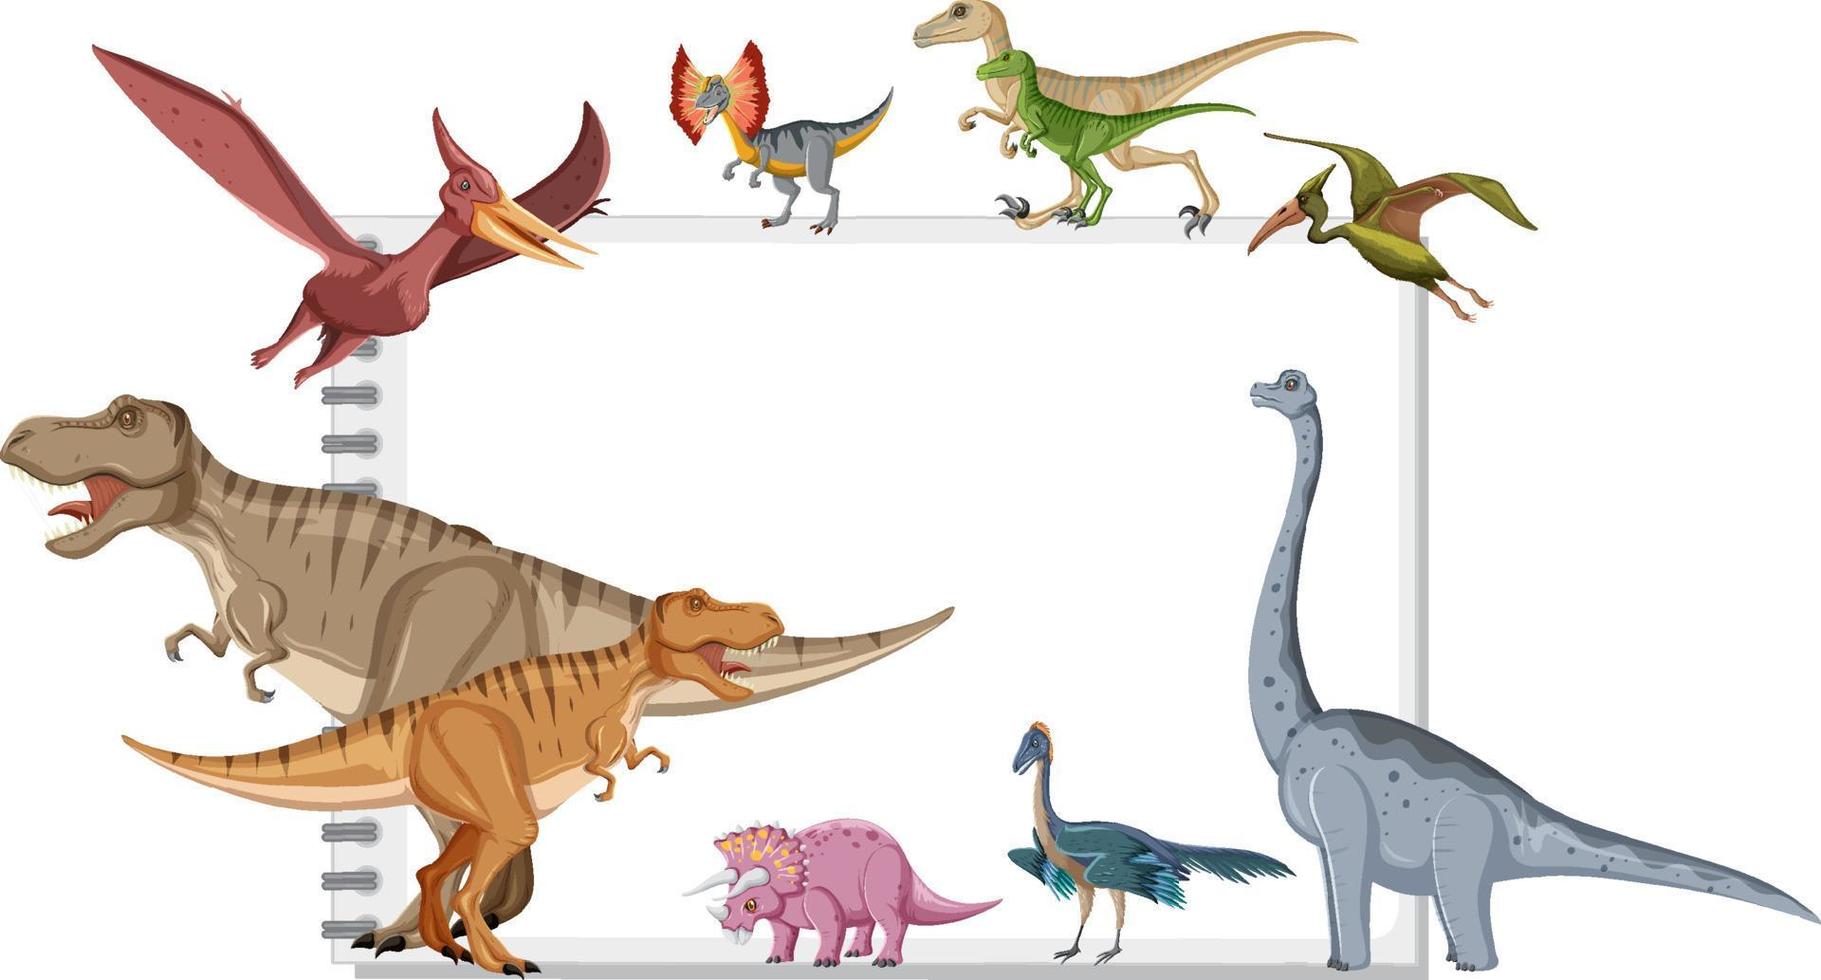 Group of dinosaurs around note on white background vector